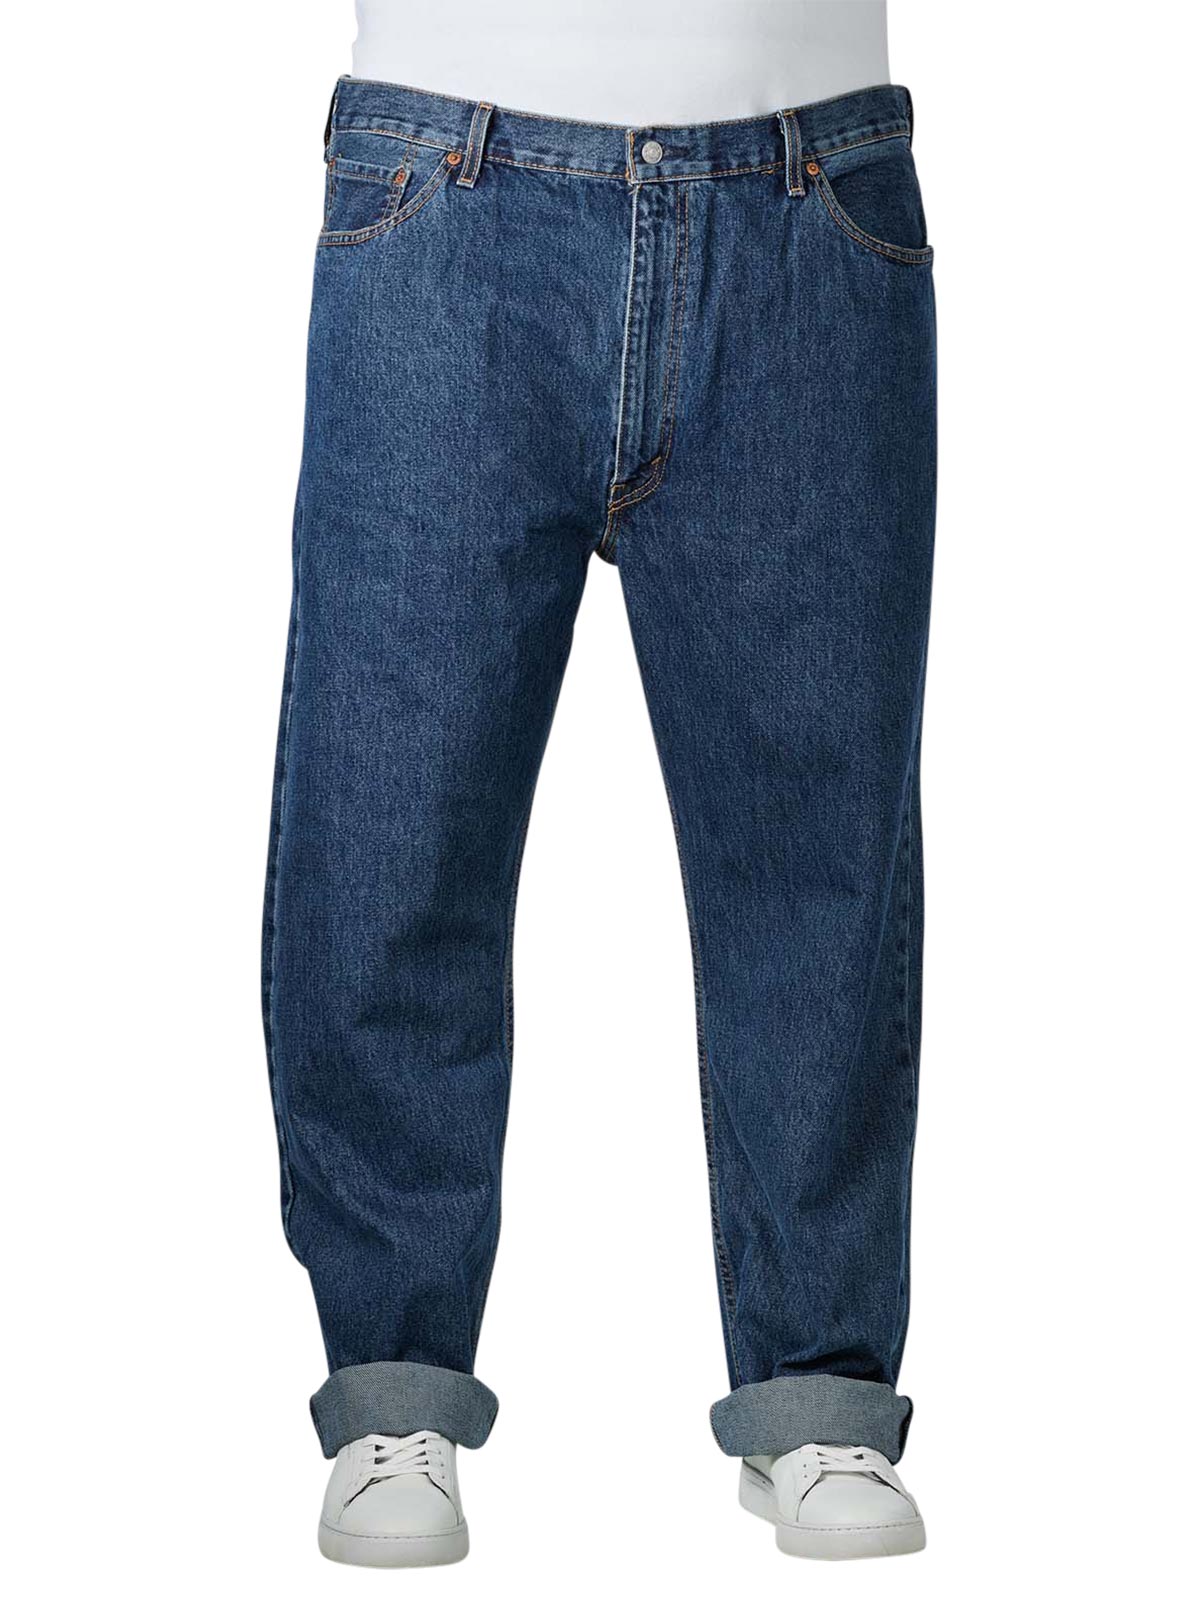 Levi's 505 Big & Tall Jeans dark stonewash Levi's Men's Jeans | Free  Shipping on  - SIMPLY LOOK GOOD